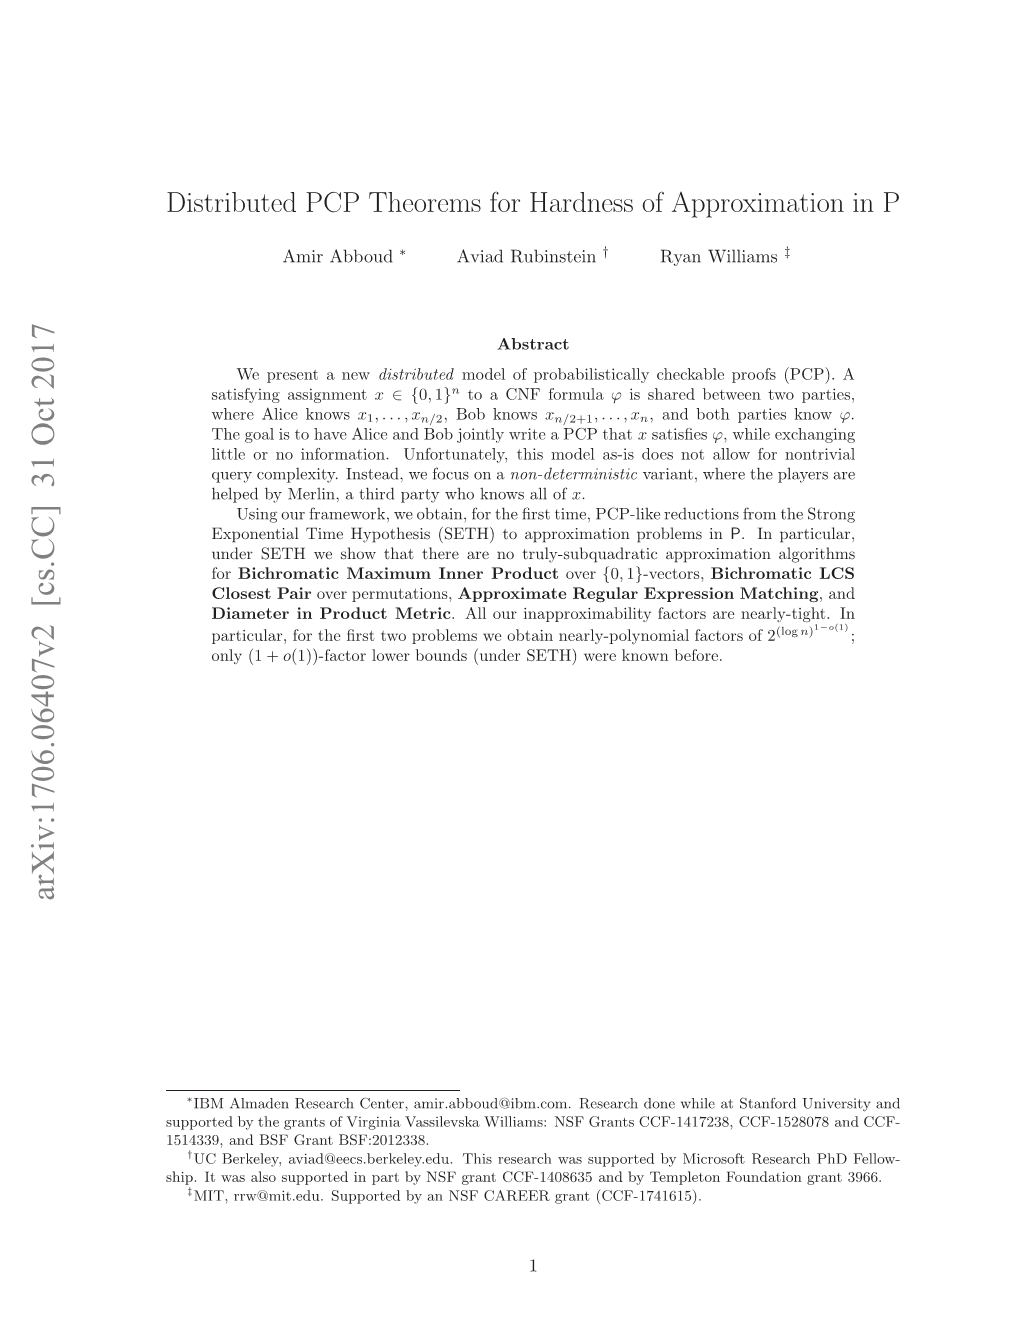 Distributed PCP Theorems for Hardness of Approximation in P